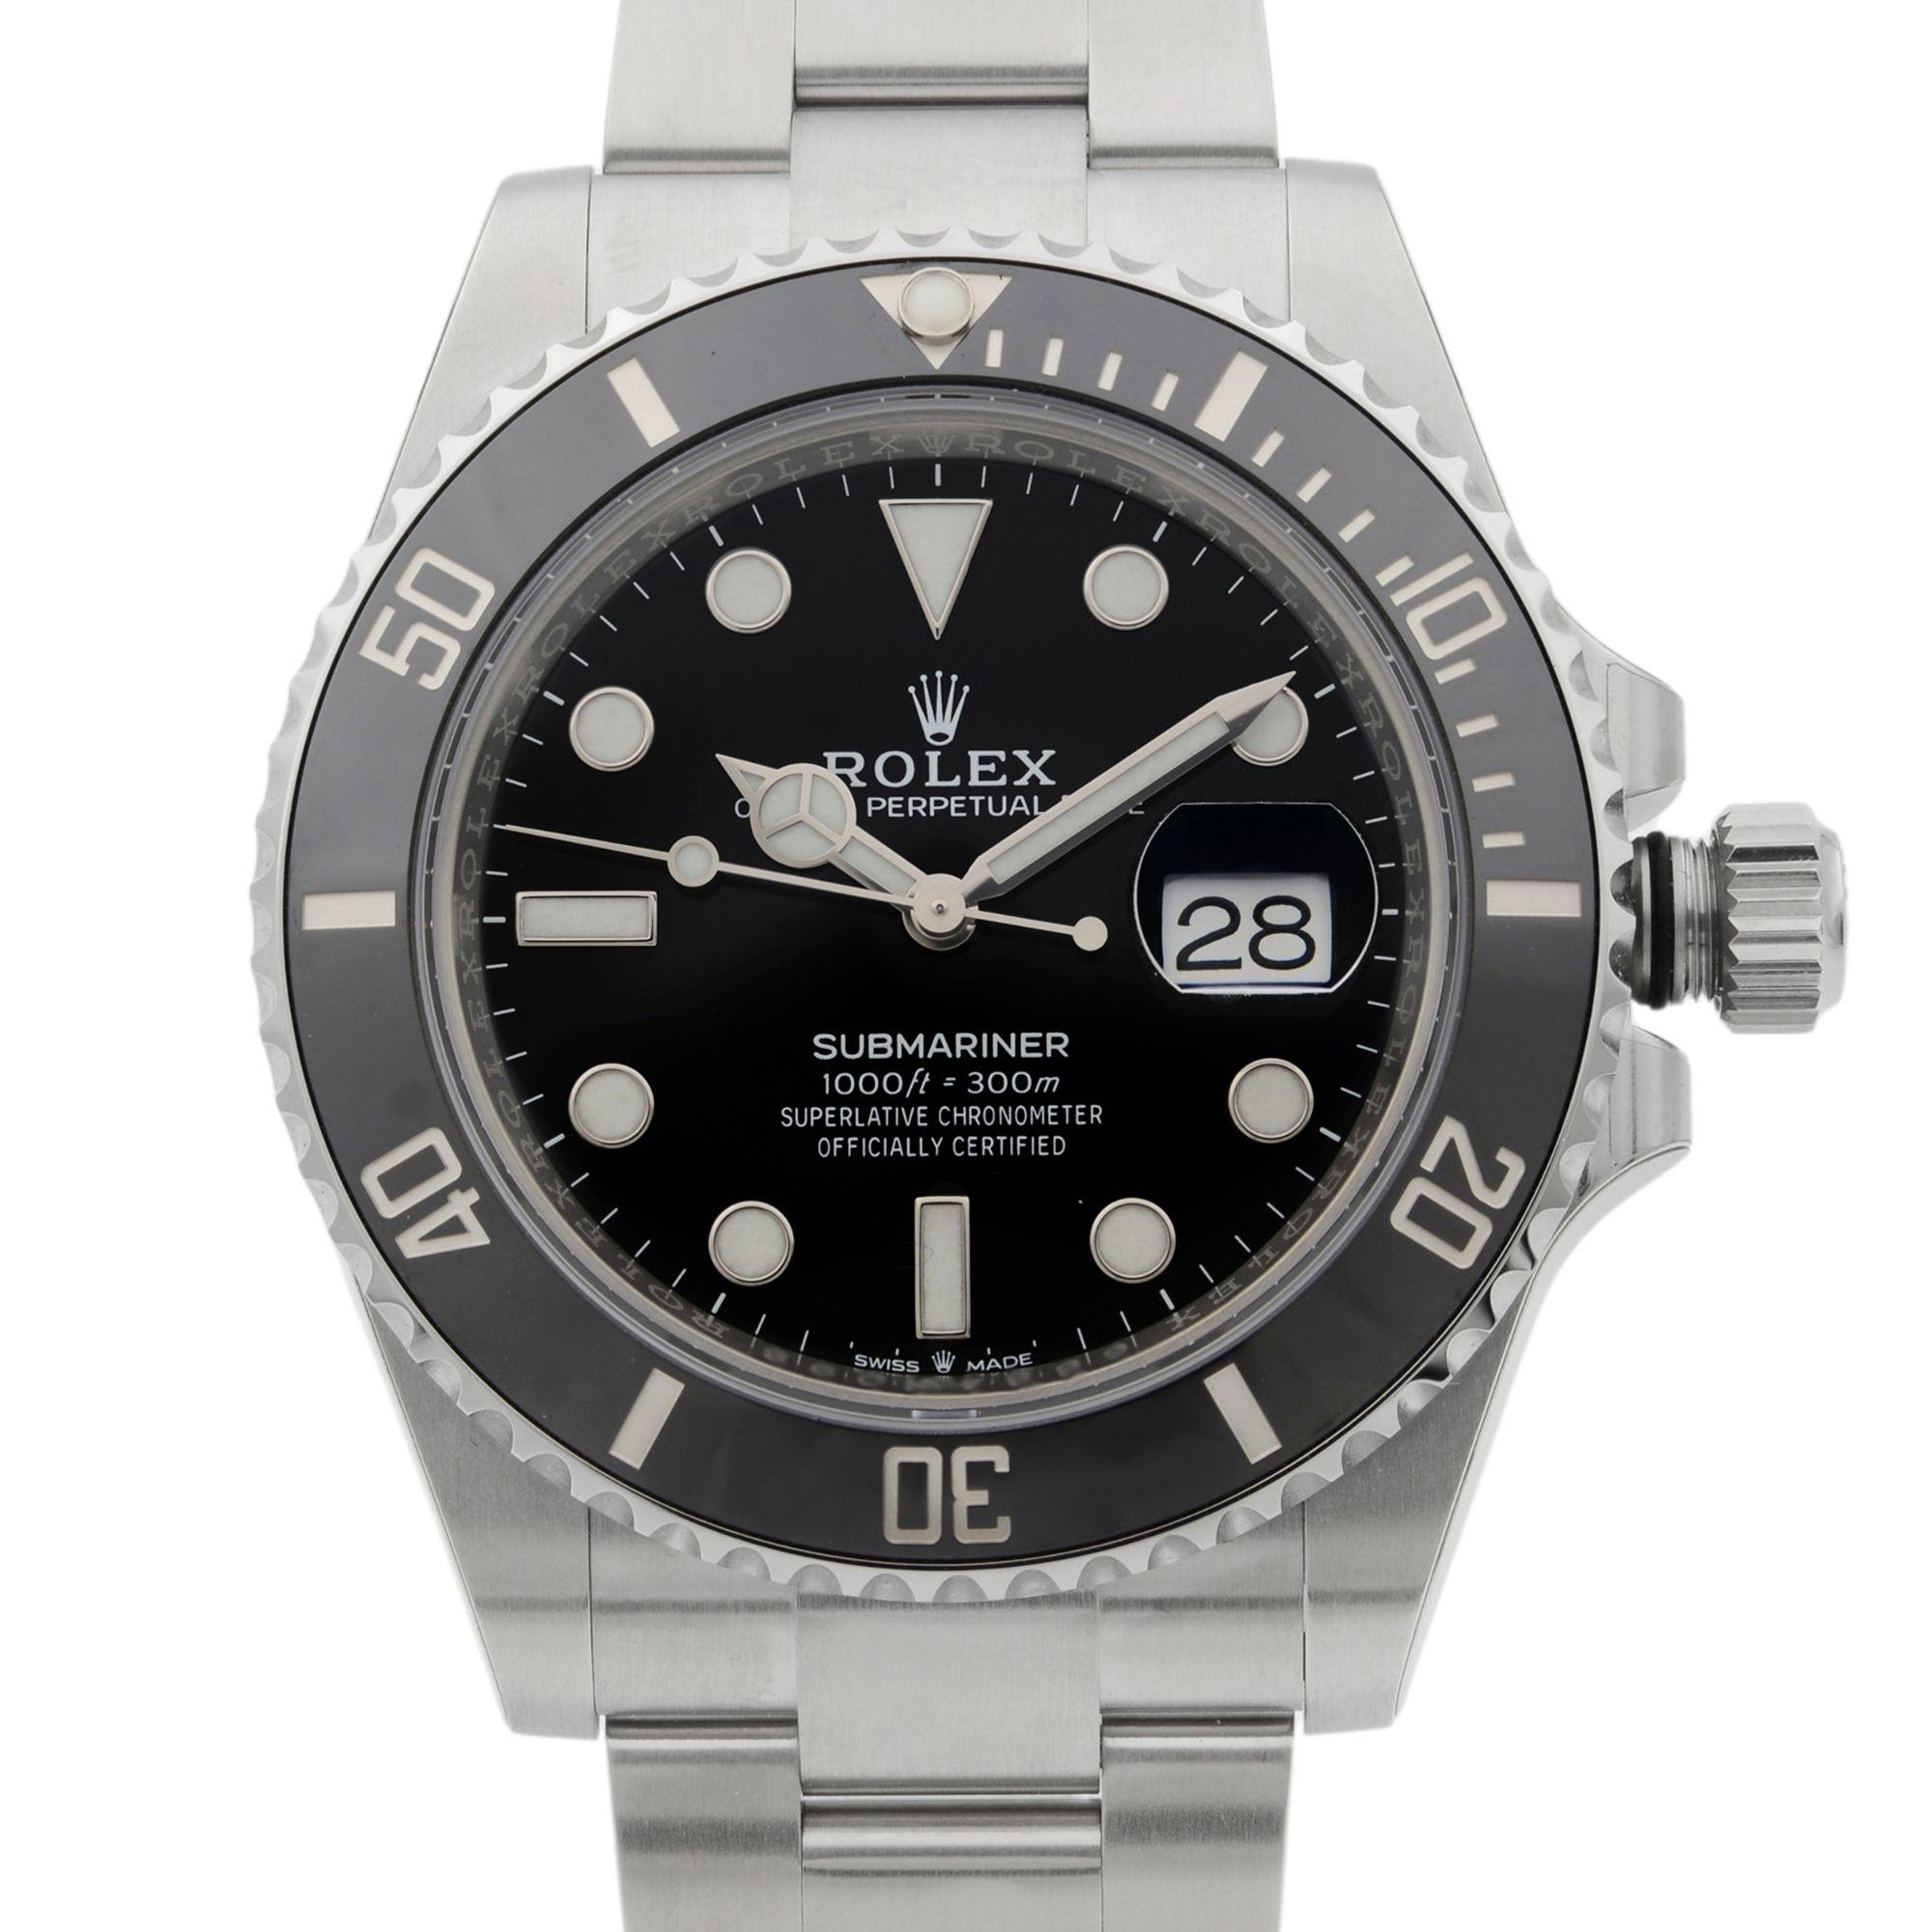 This brand new Rolex Submariner 126610LN is a beautiful men's timepiece that is powered by mechanical (automatic) movement which is cased in a stainless steel case. It has a round shape face, depth indicator dial and has hand  style markers. It is